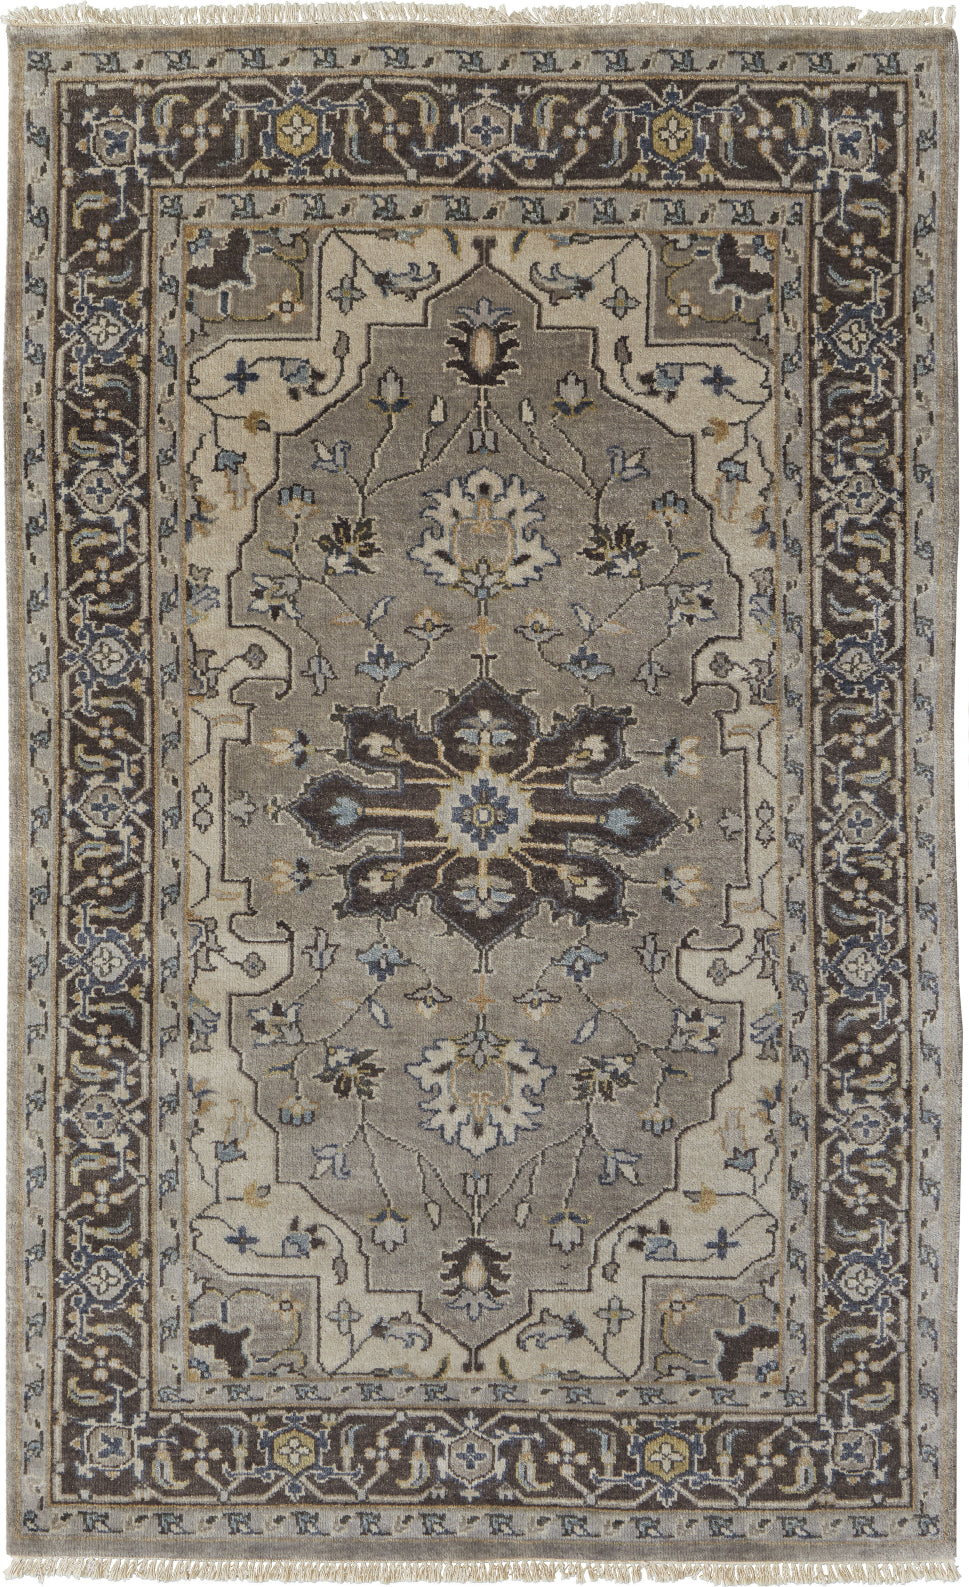 Feizy Ustad 6112F Gray/Blue Area Rug Lifestyle Image Feature